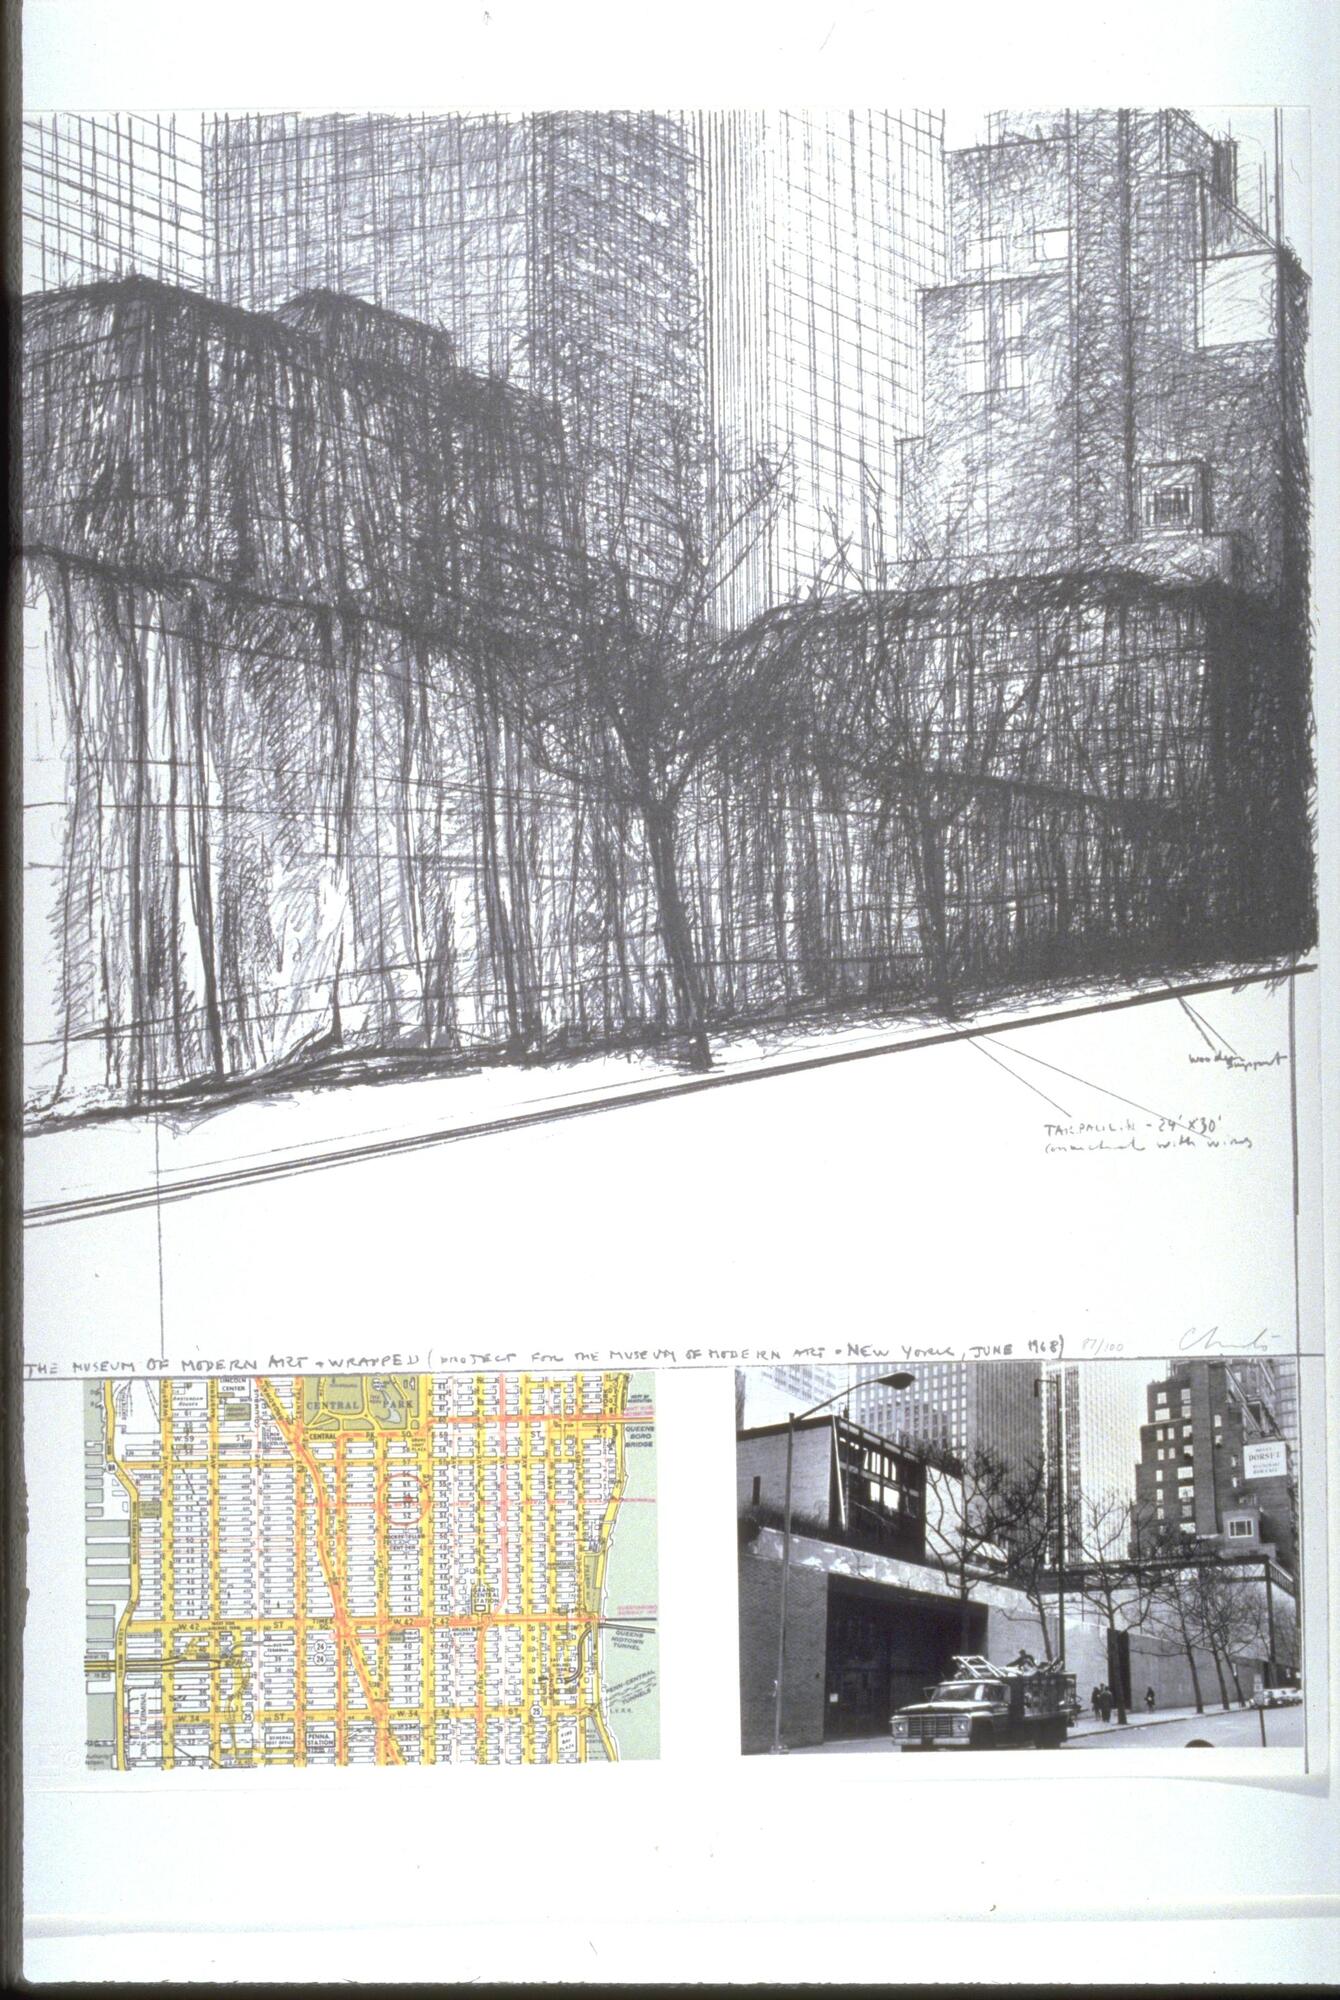 This print includes three seperate images and text.  At the top is a sketch in black ink of the Museum of Modern Art, wrapped in textile, with buildings behind it.  Below is a map of the area in NYC around MoMA and a photograph of MoMA, unwrapped. Handwritten labels and notes are included.